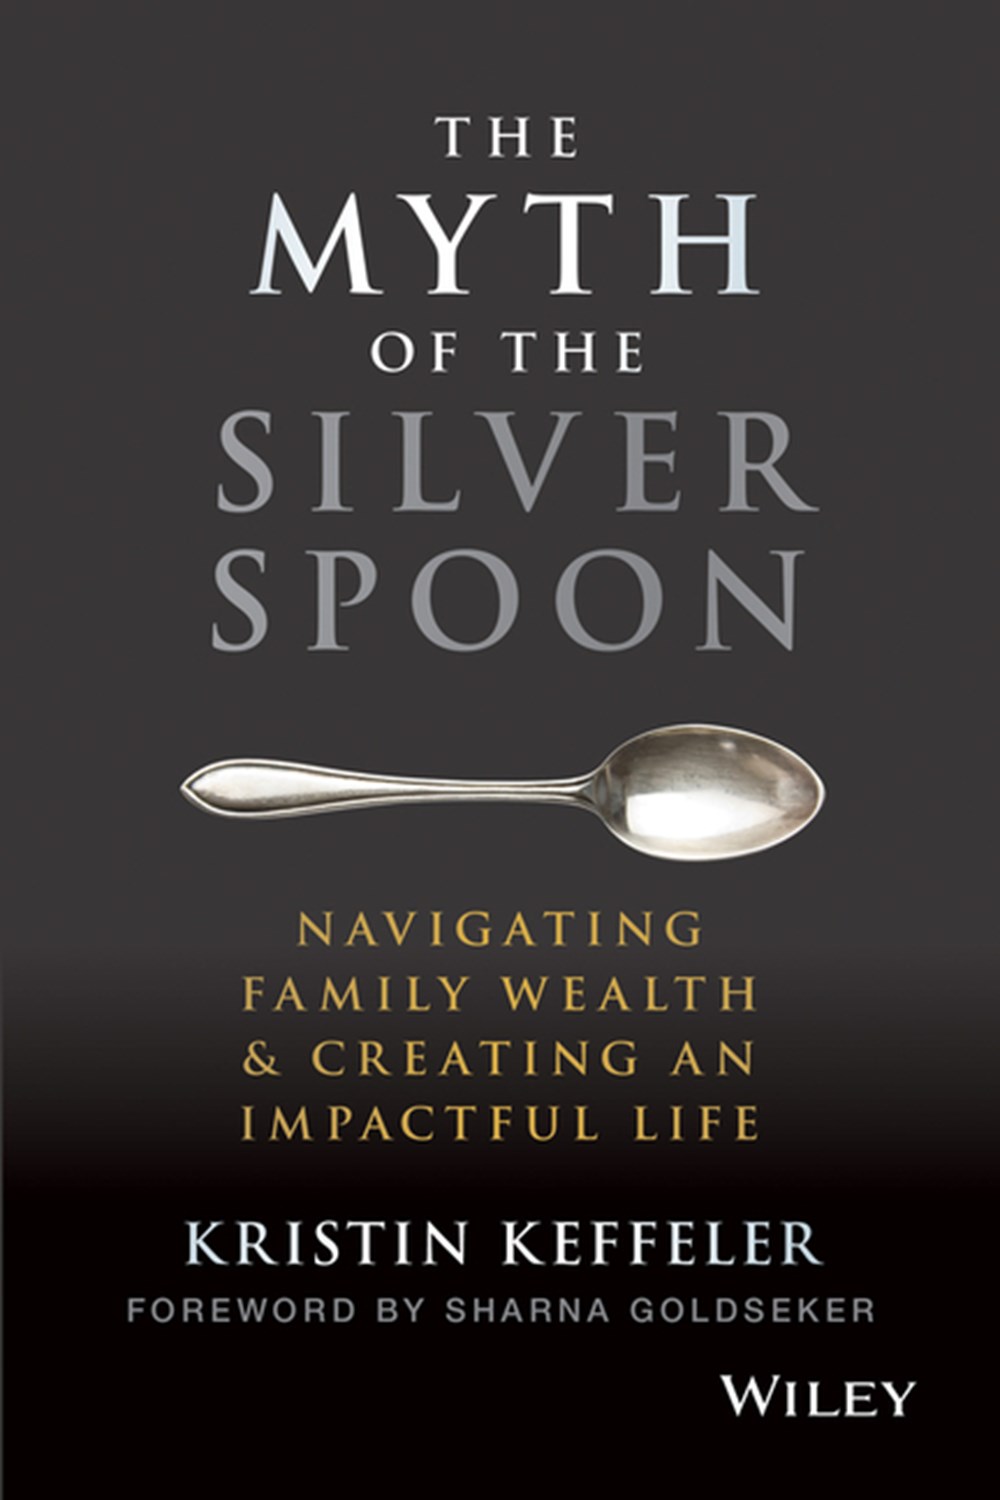 Myth of the Silver Spoon: Navigating Family Wealth and Creating an Impactful Life